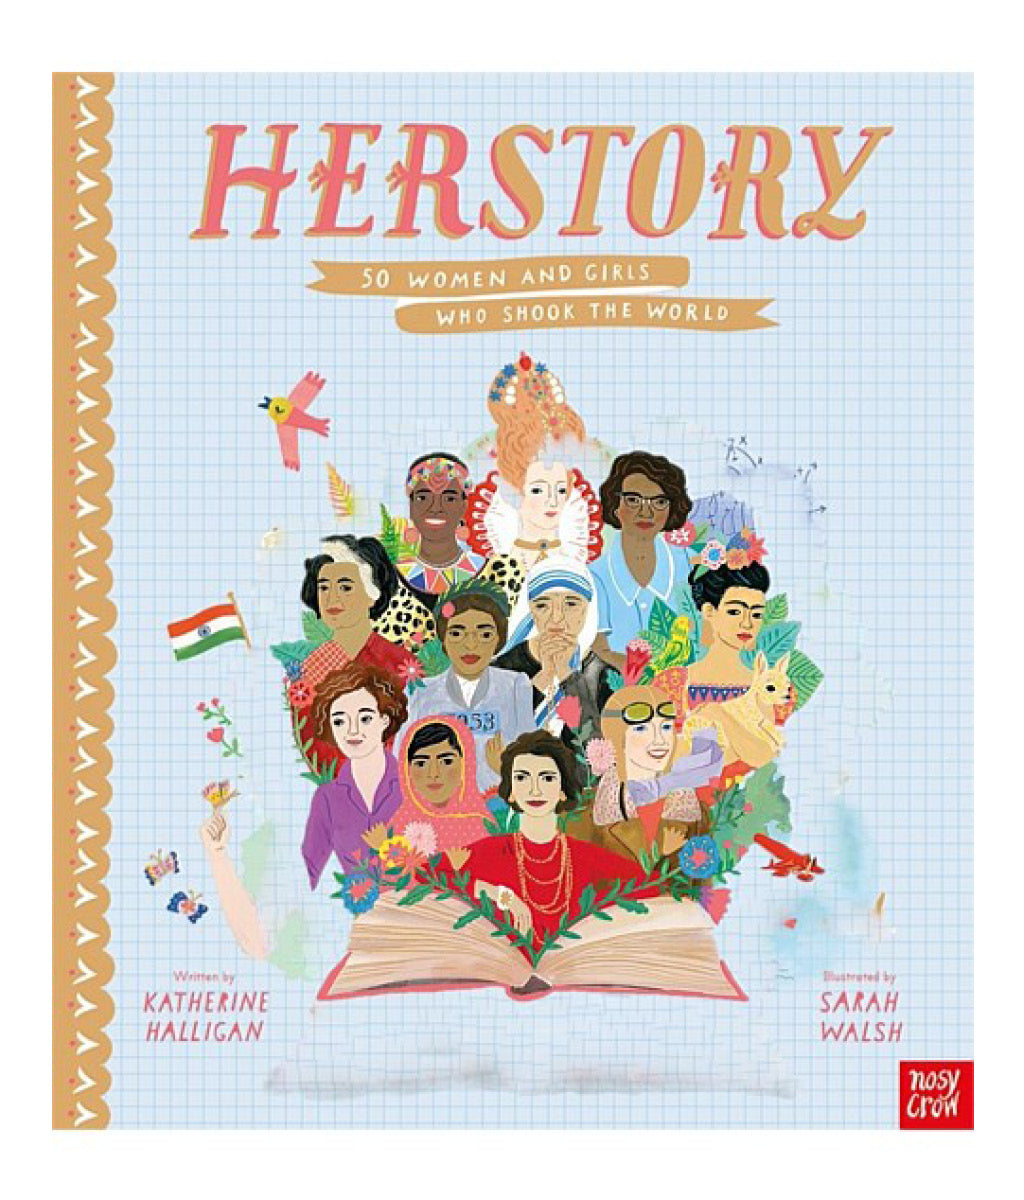 Herstory: 50 women and girls who shook the world by Katherine Halligan, Sarah Walsh